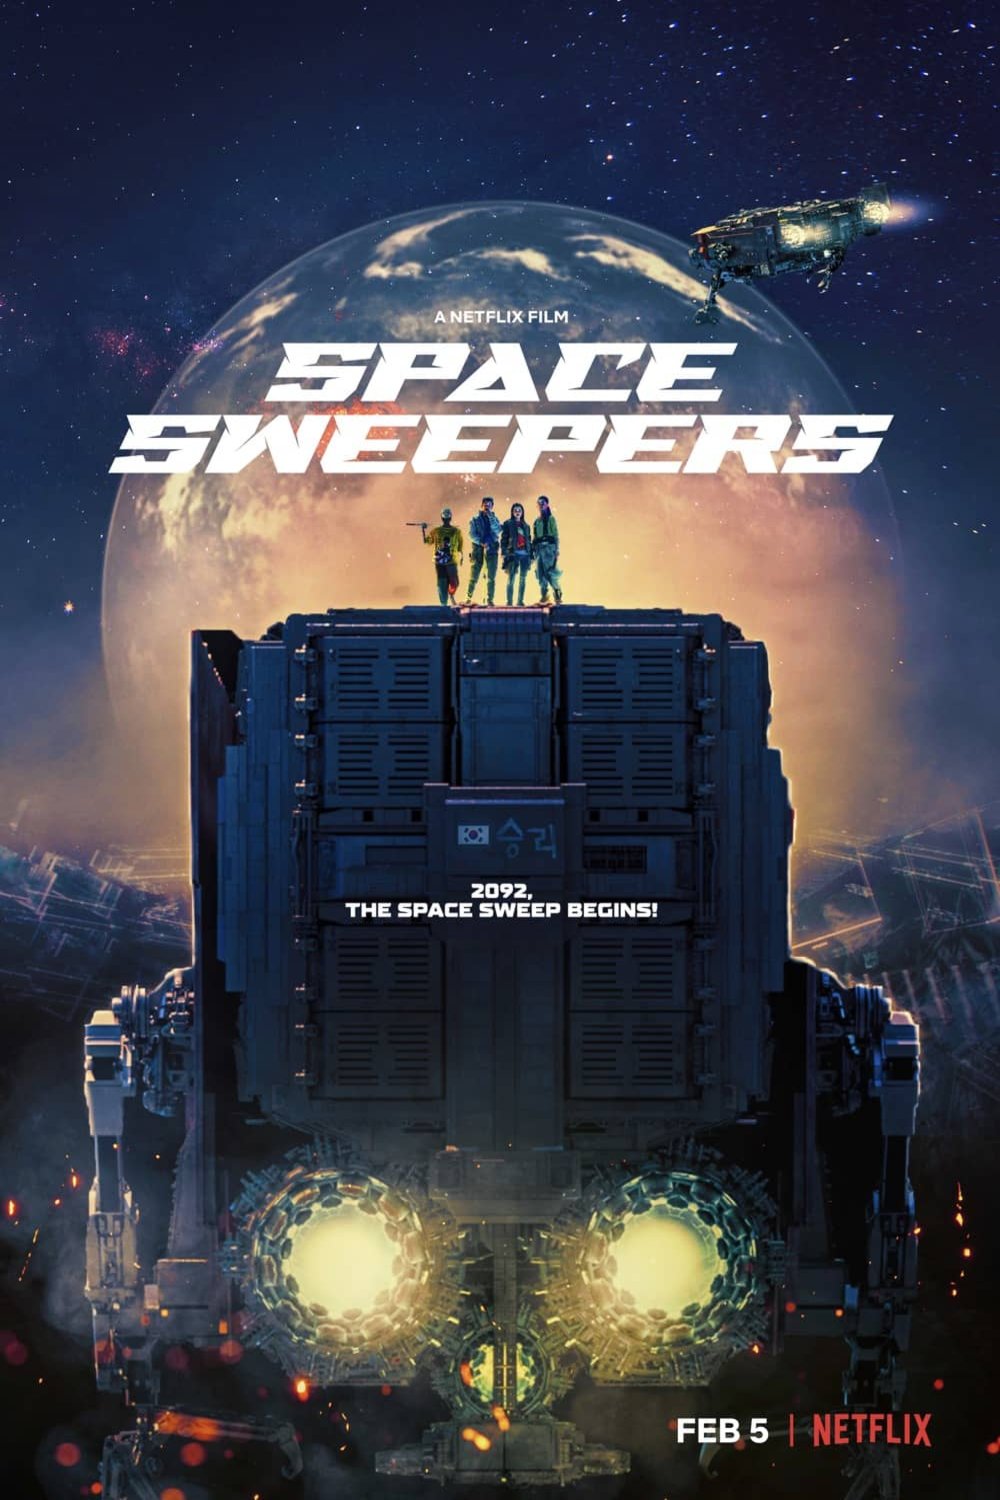 L'affiche du film Space Sweepers